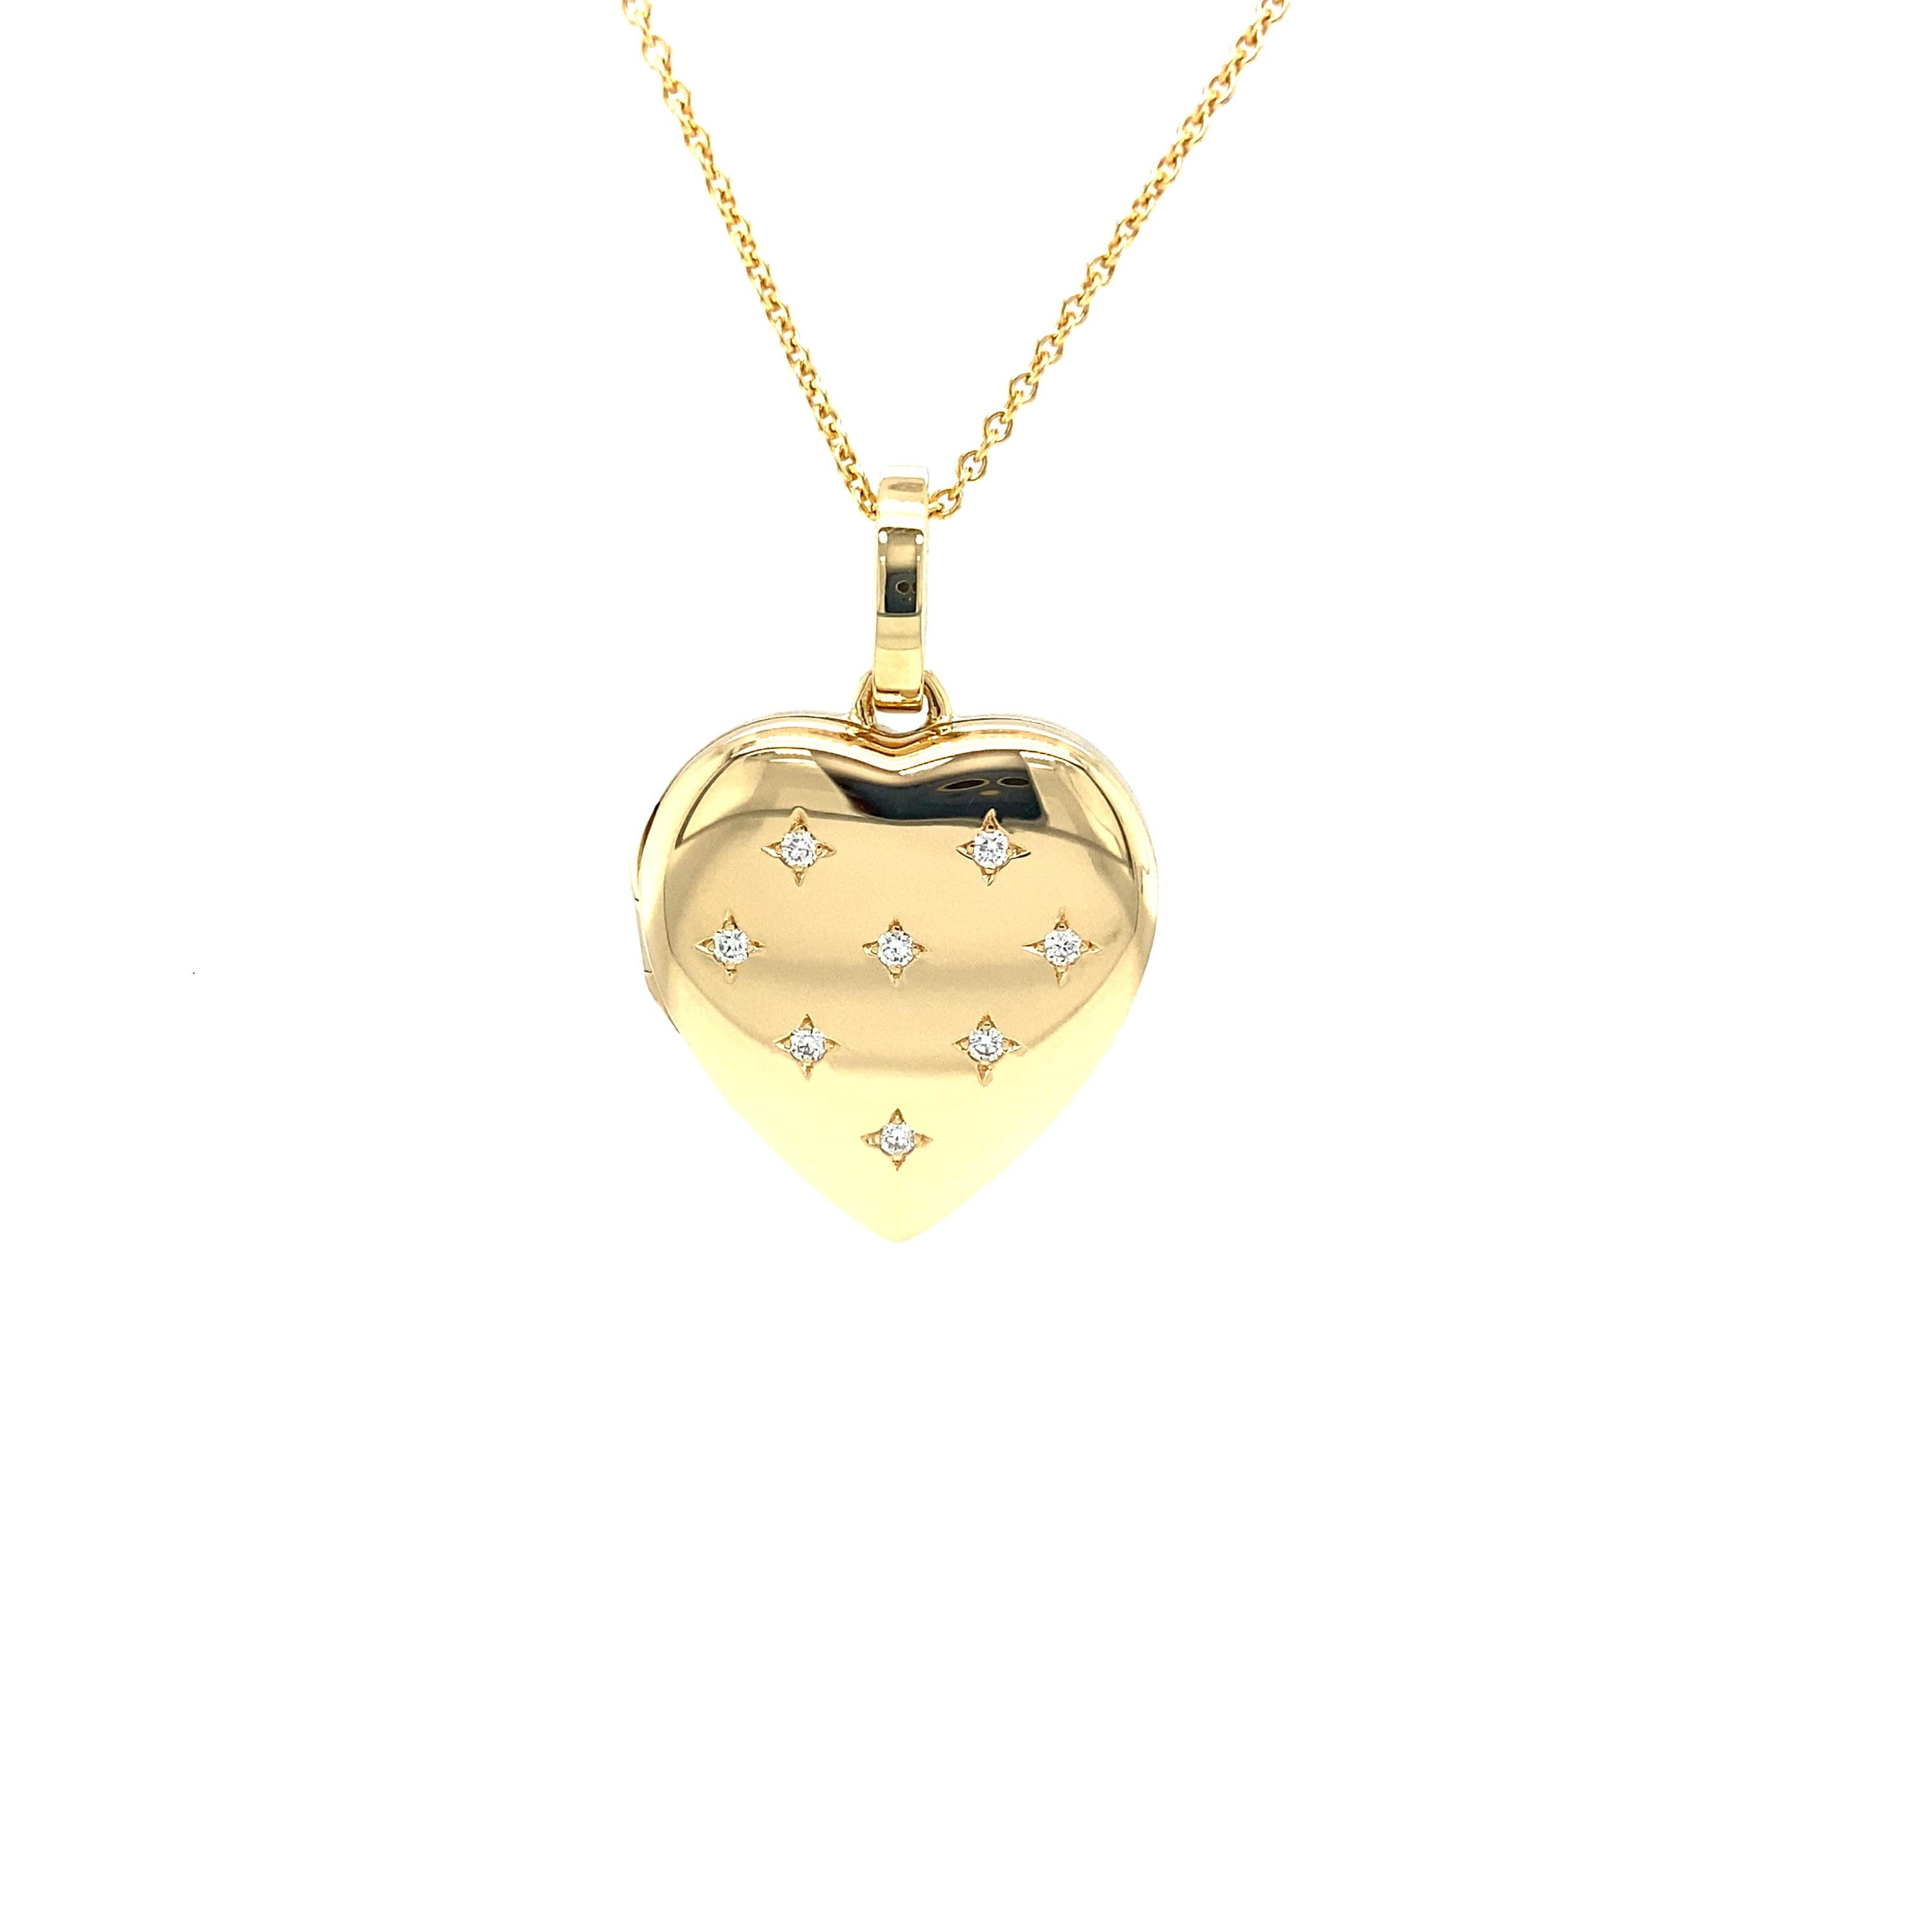 Heart shaped locket pendant necklace by VICTOR MAYER - 18k yellow gold - Hallmark Collection, 8 diamonds total 0.16 ct, G VS, for two pictures

About the creator Victor Mayer
Victor Mayer is internationally renowned for elegant timeless designs and